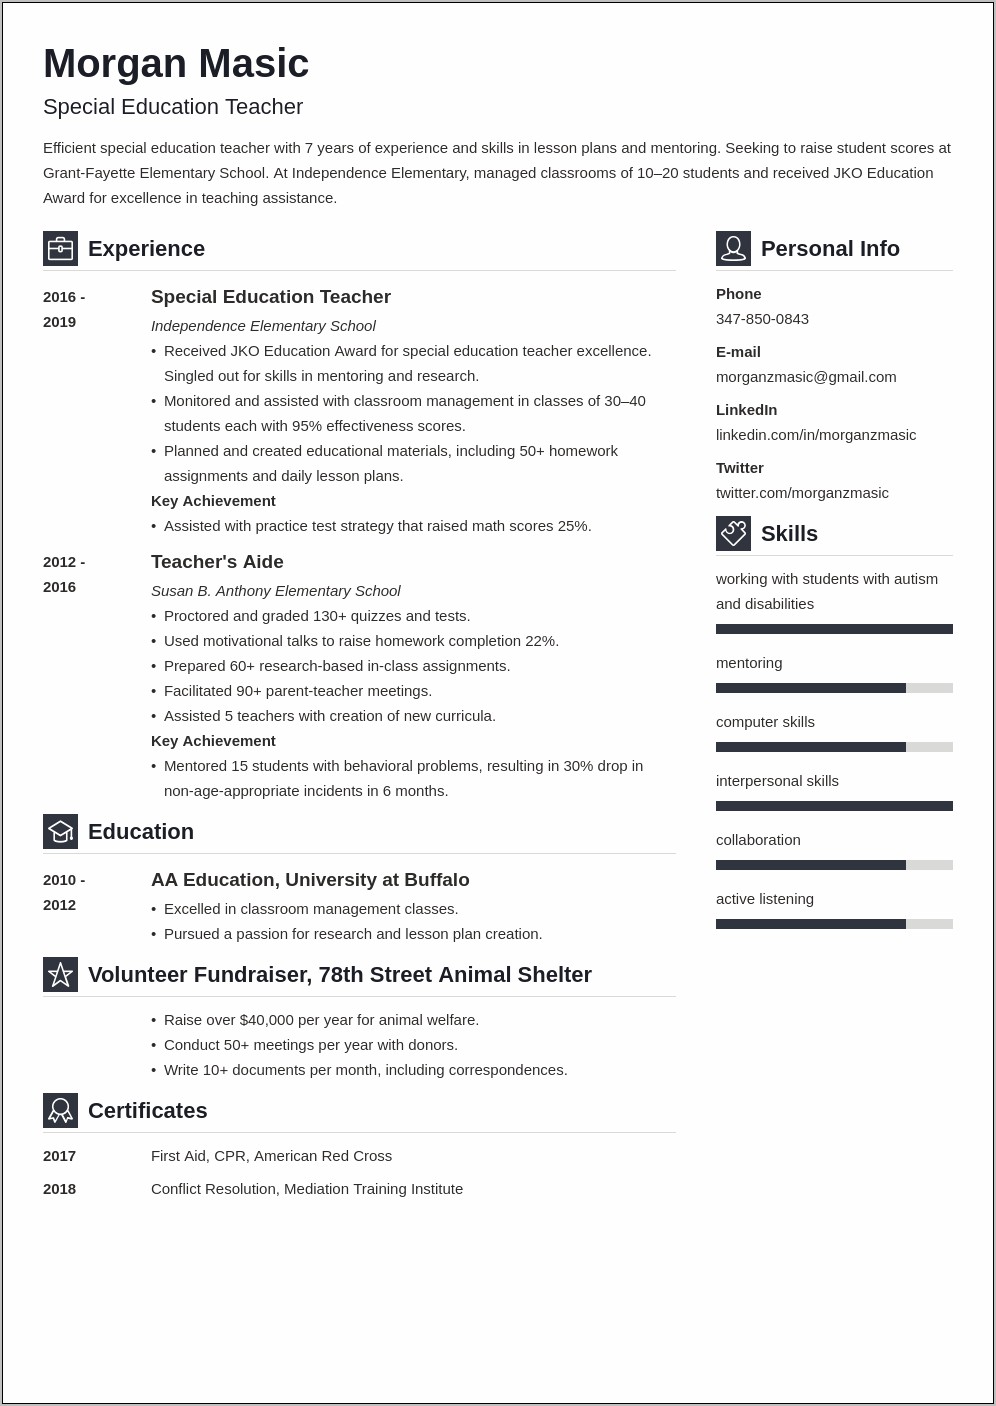 Good Example Of A Special Ed Teacher Resume